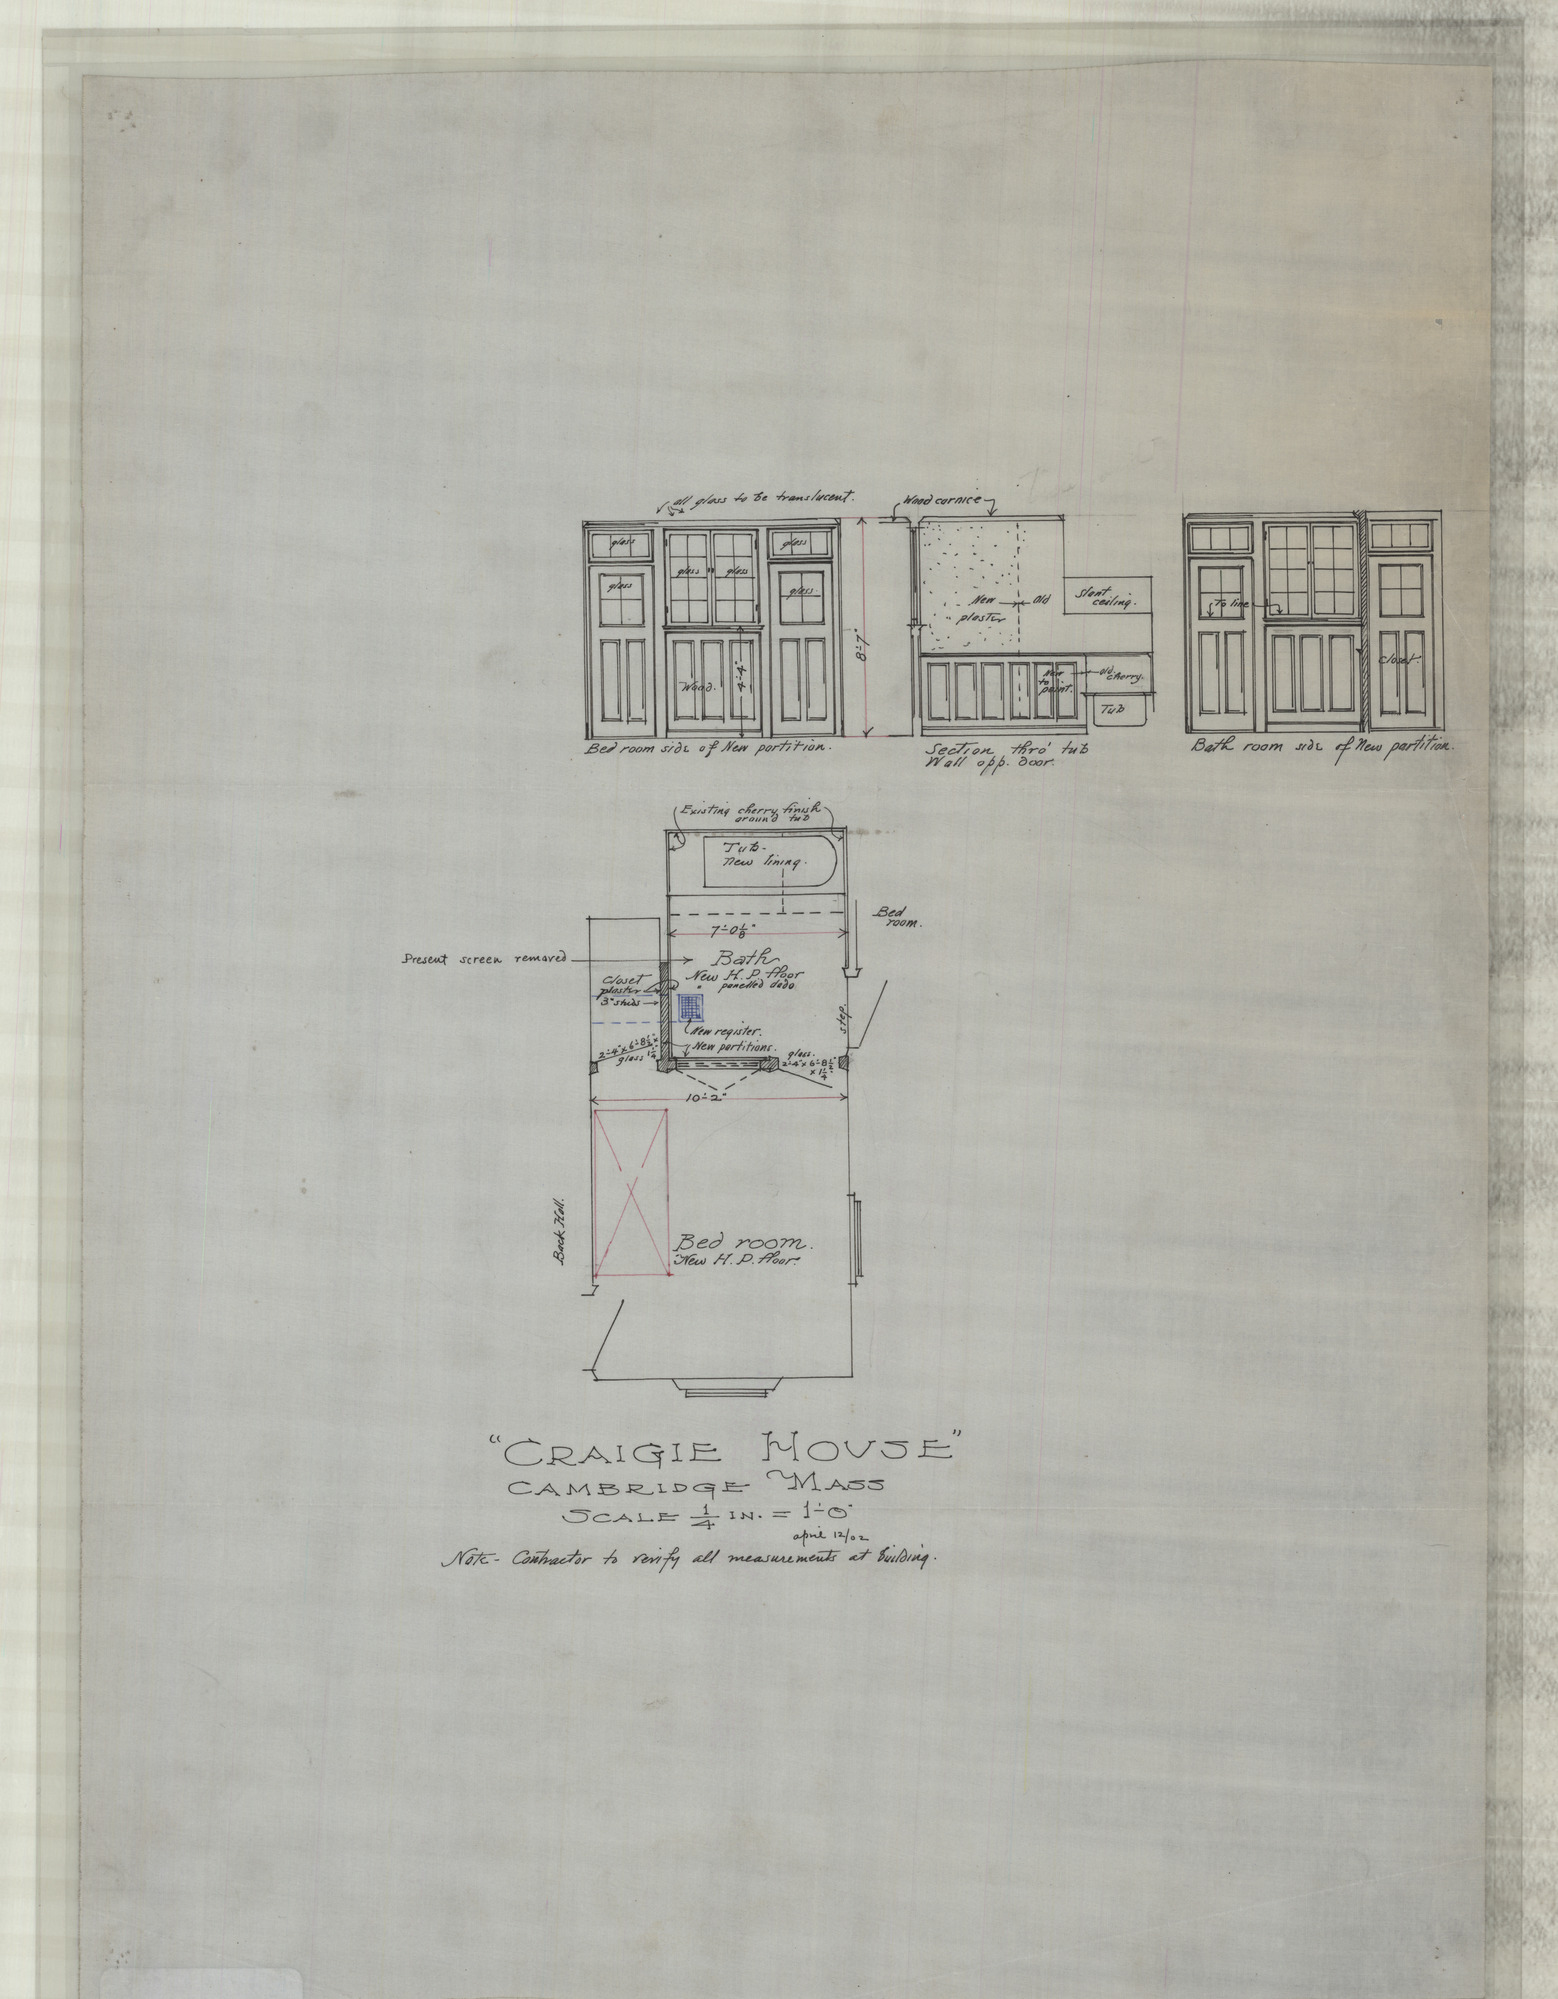 Drawing representing the bedroom and bathroom's plan, partitions, and a section with interior details